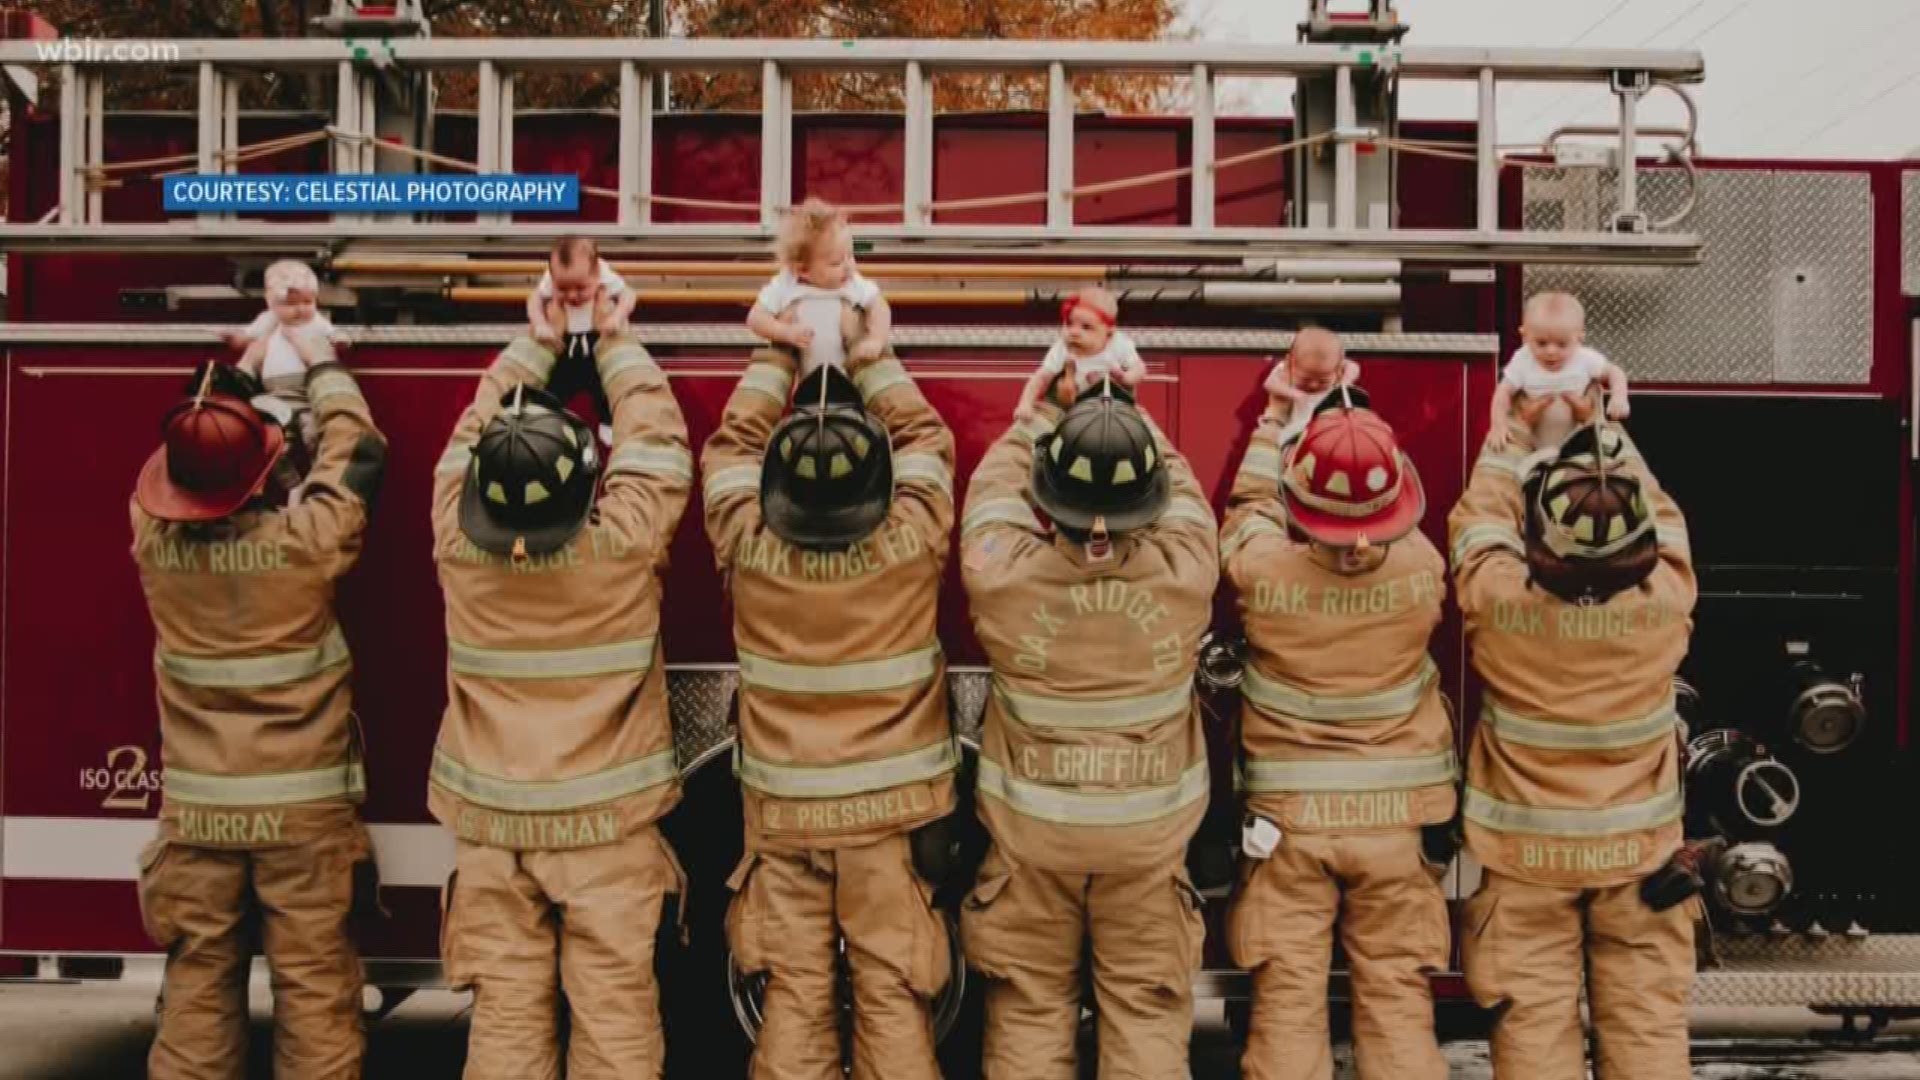 The Oak Ridge Fire Department has 6 new members! Newborns born to parents who work for the department. Dec. 14, 2018-4pm